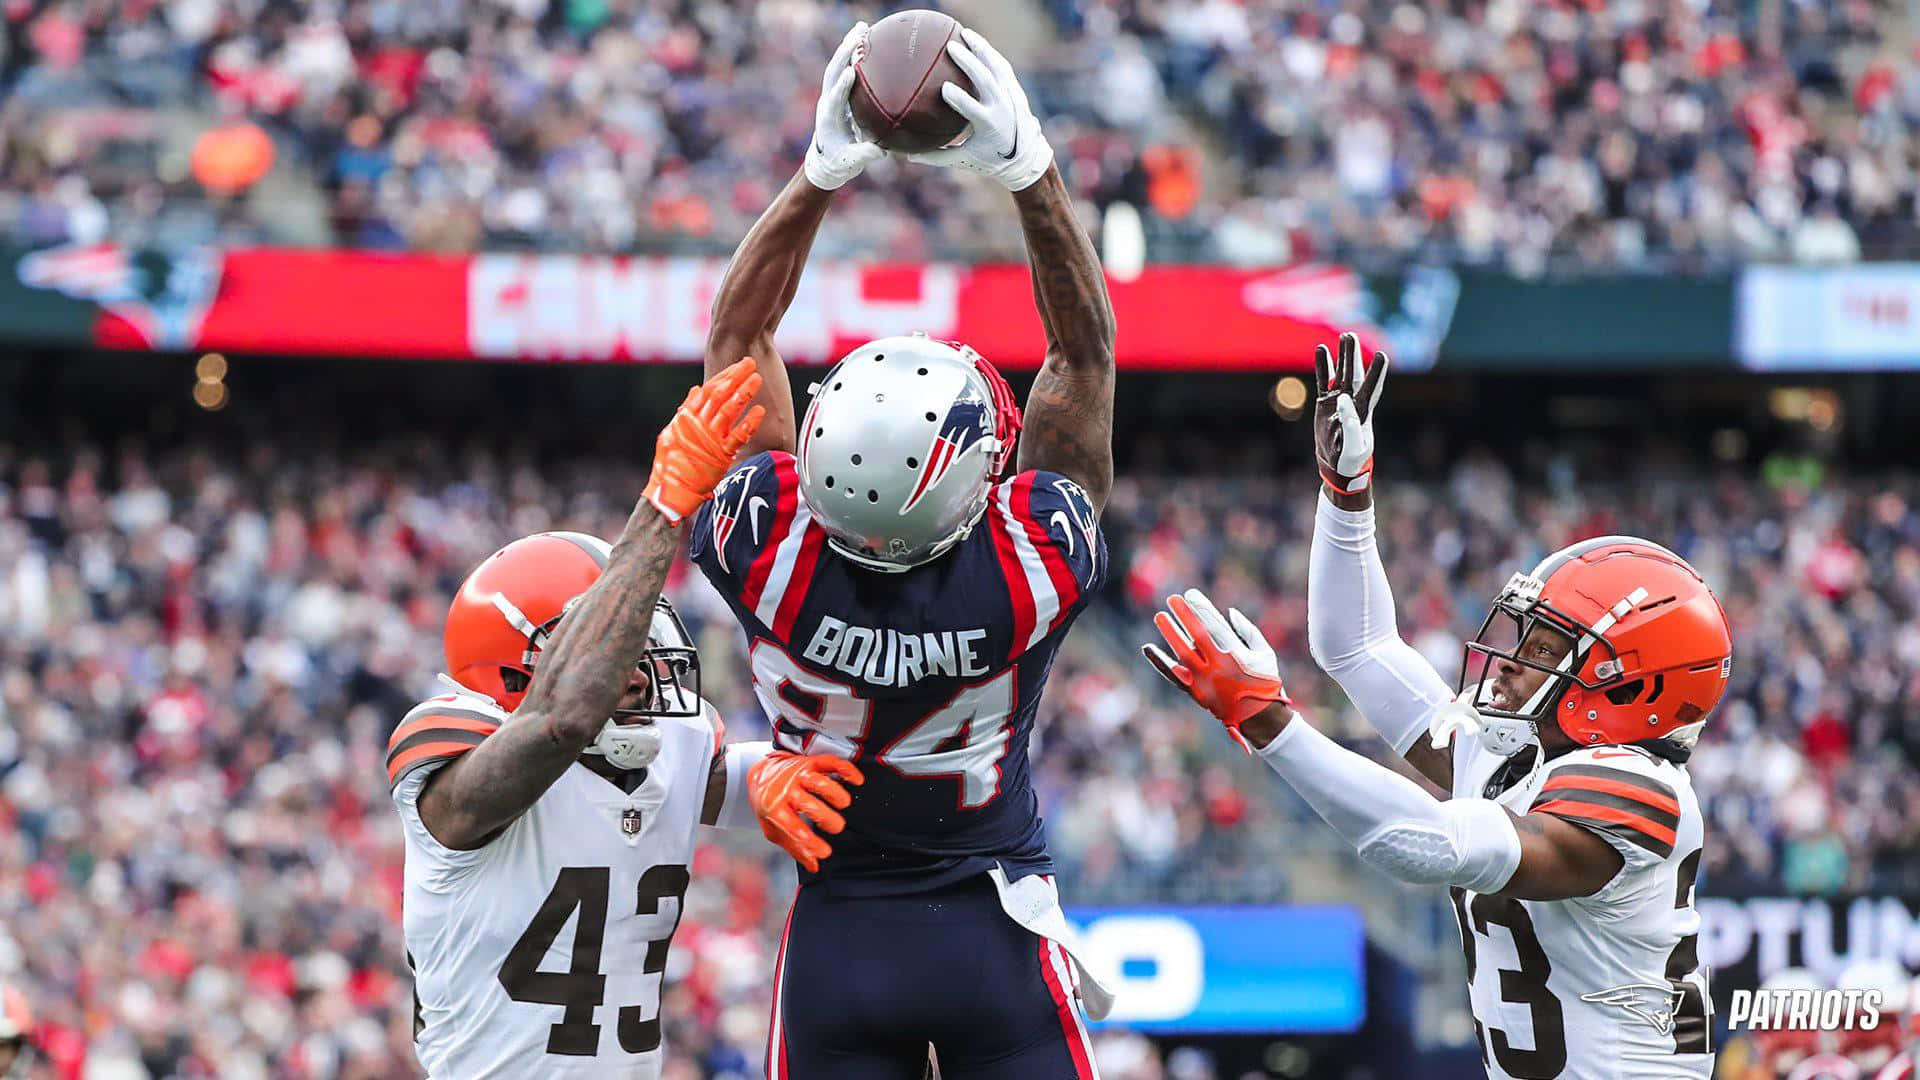 Kendrick Bourne Mid Air Catch Against Browns Wallpaper